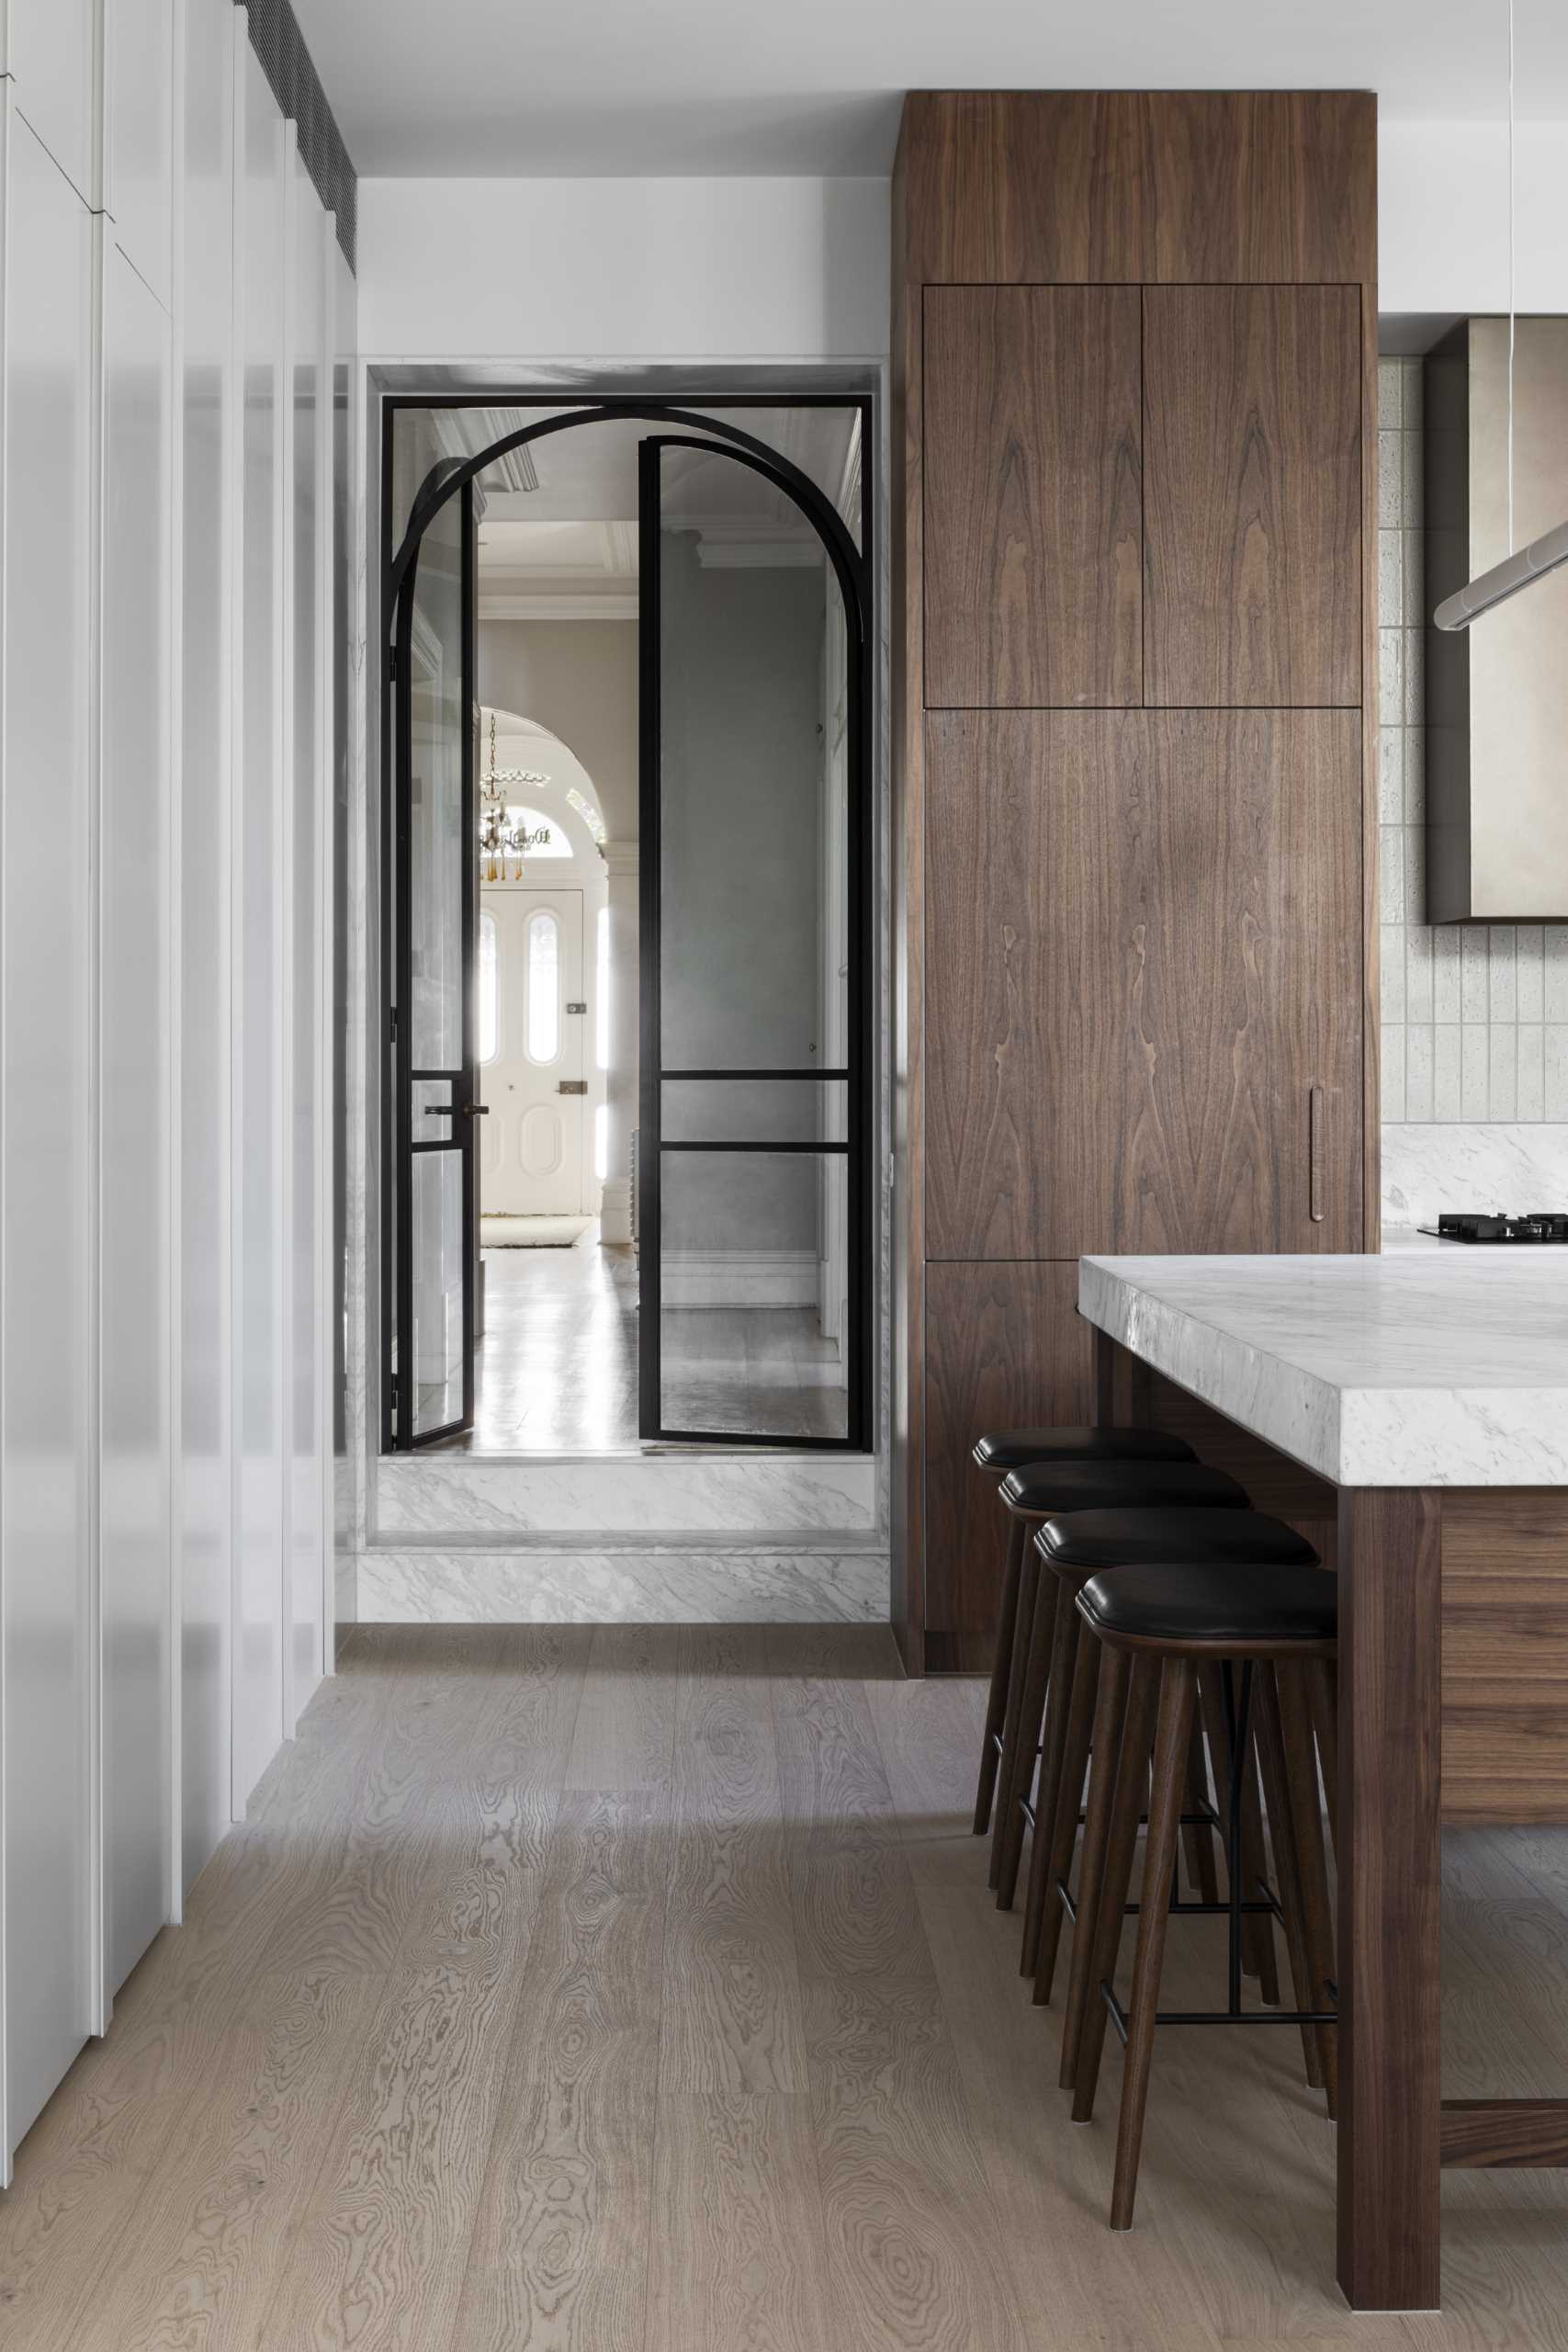 A black-framed arched door connects the original parts of the home with the new addition.